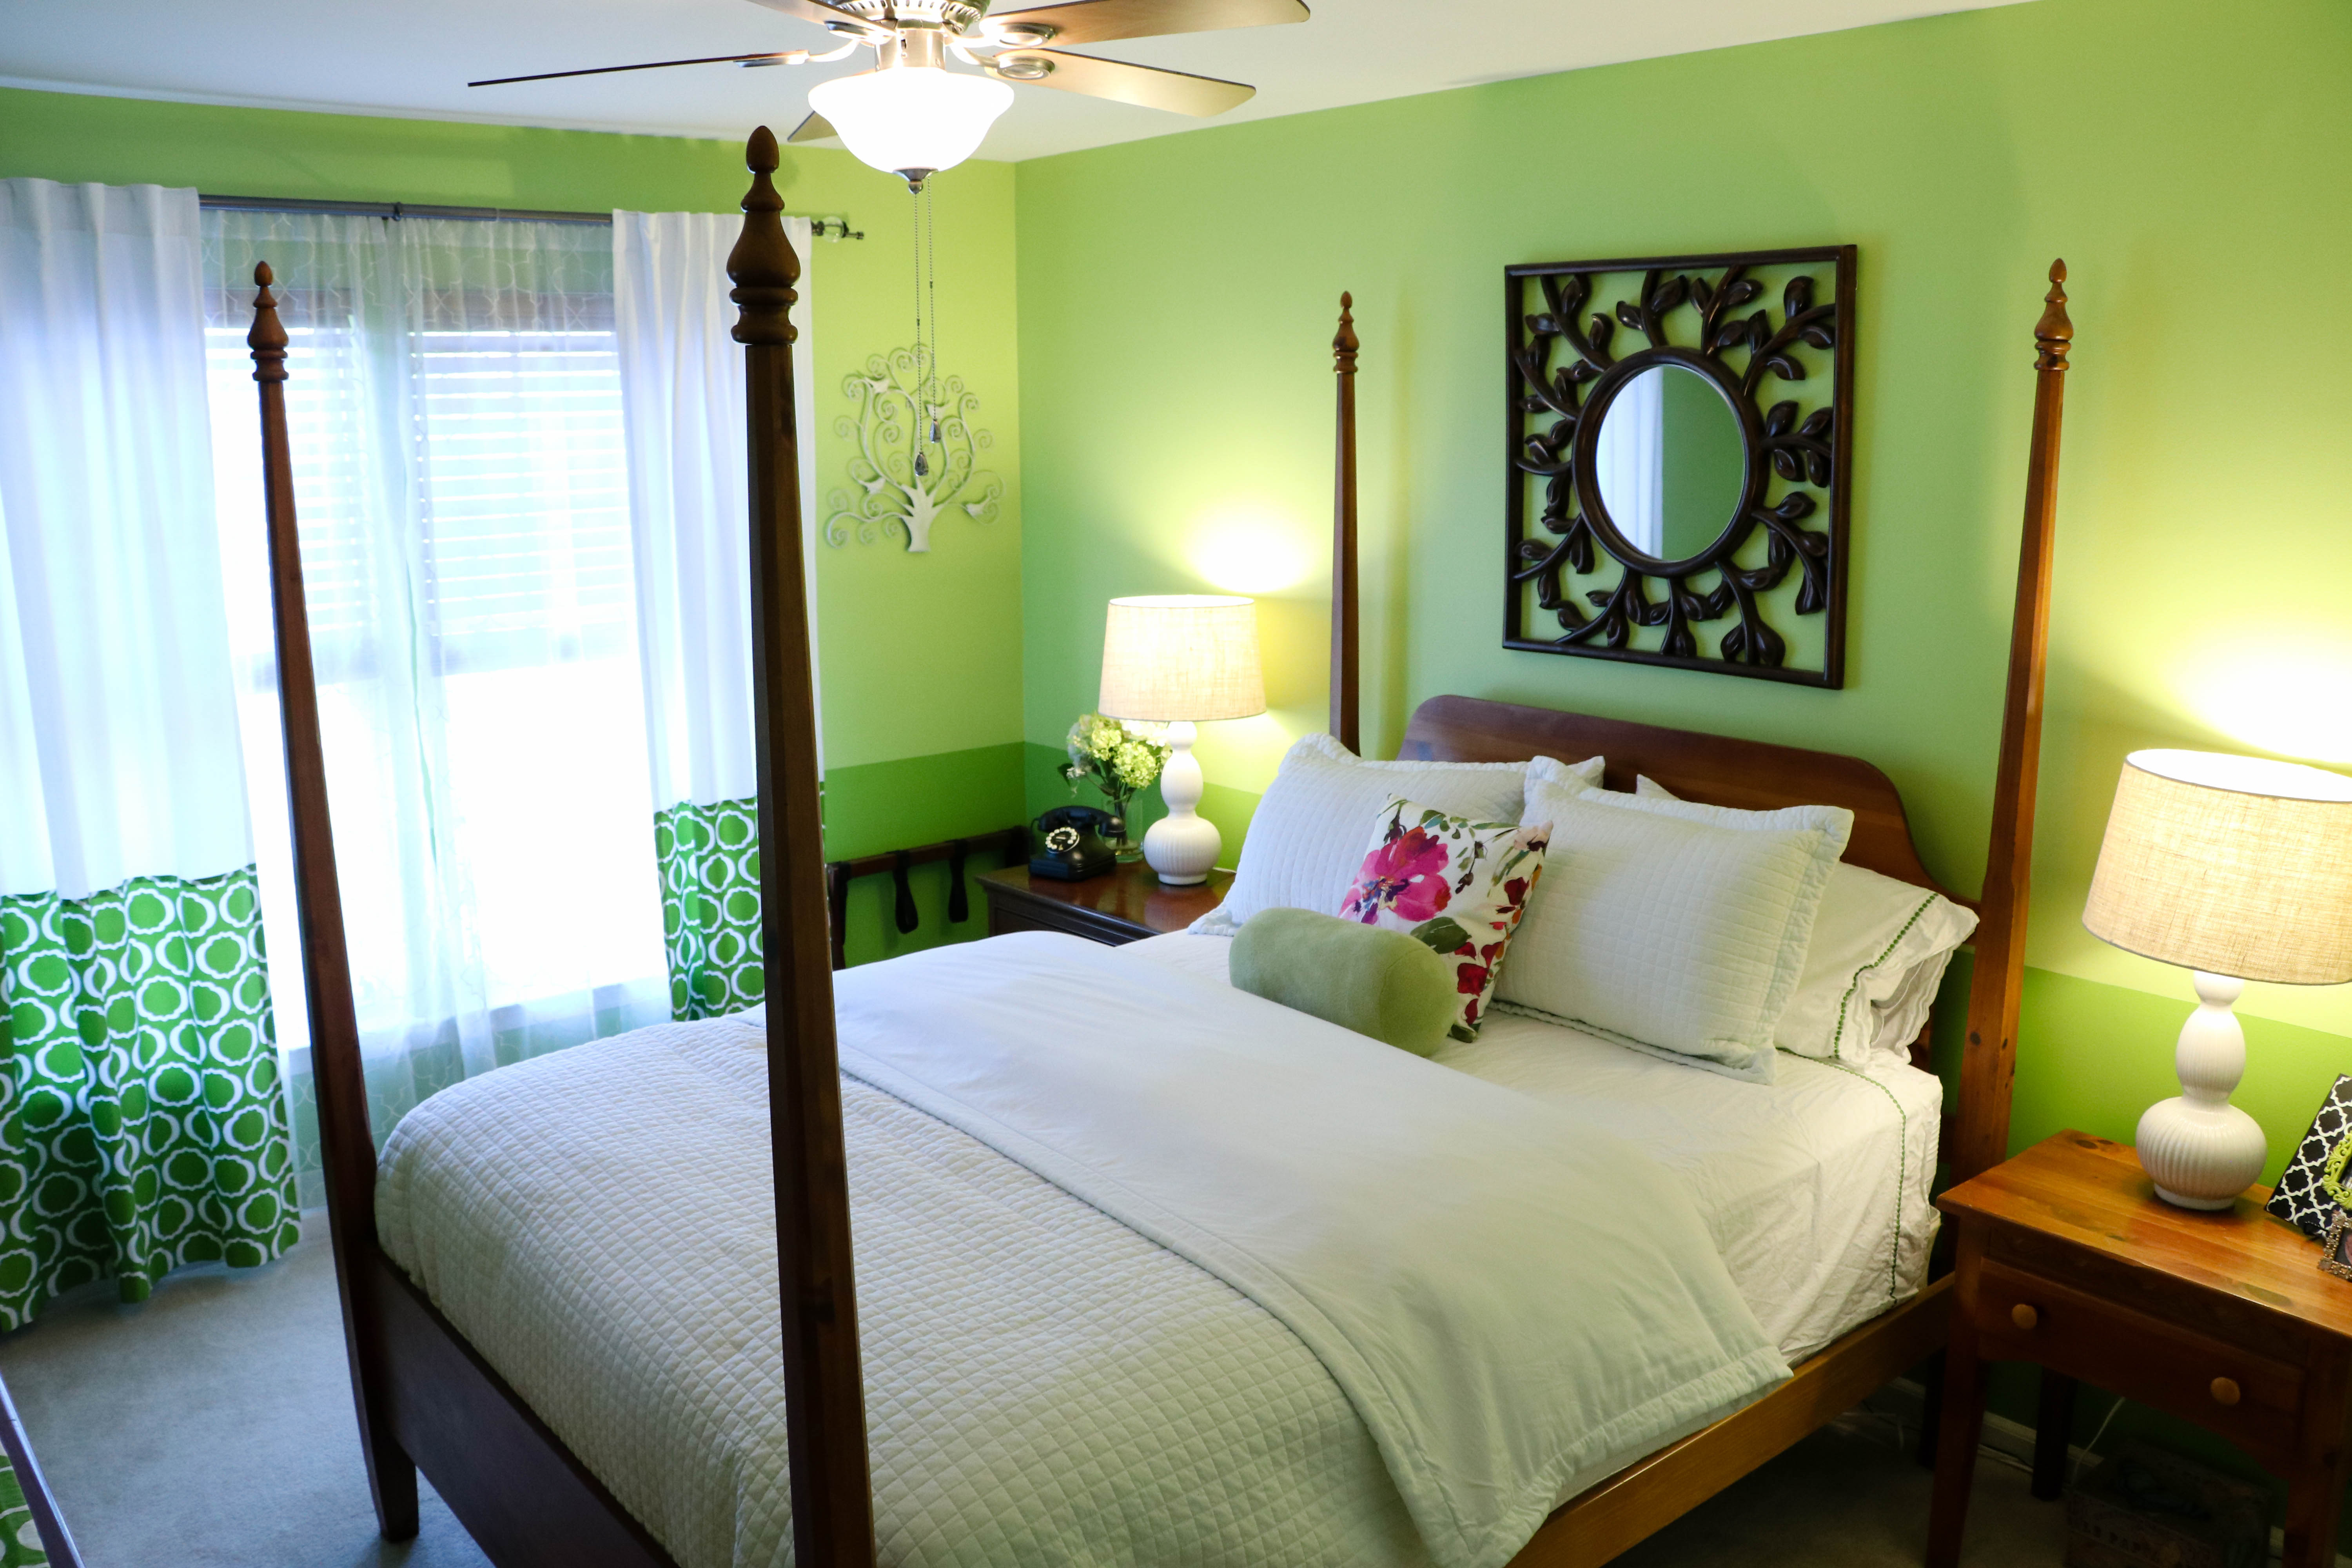 Our Green Guest Bedroom